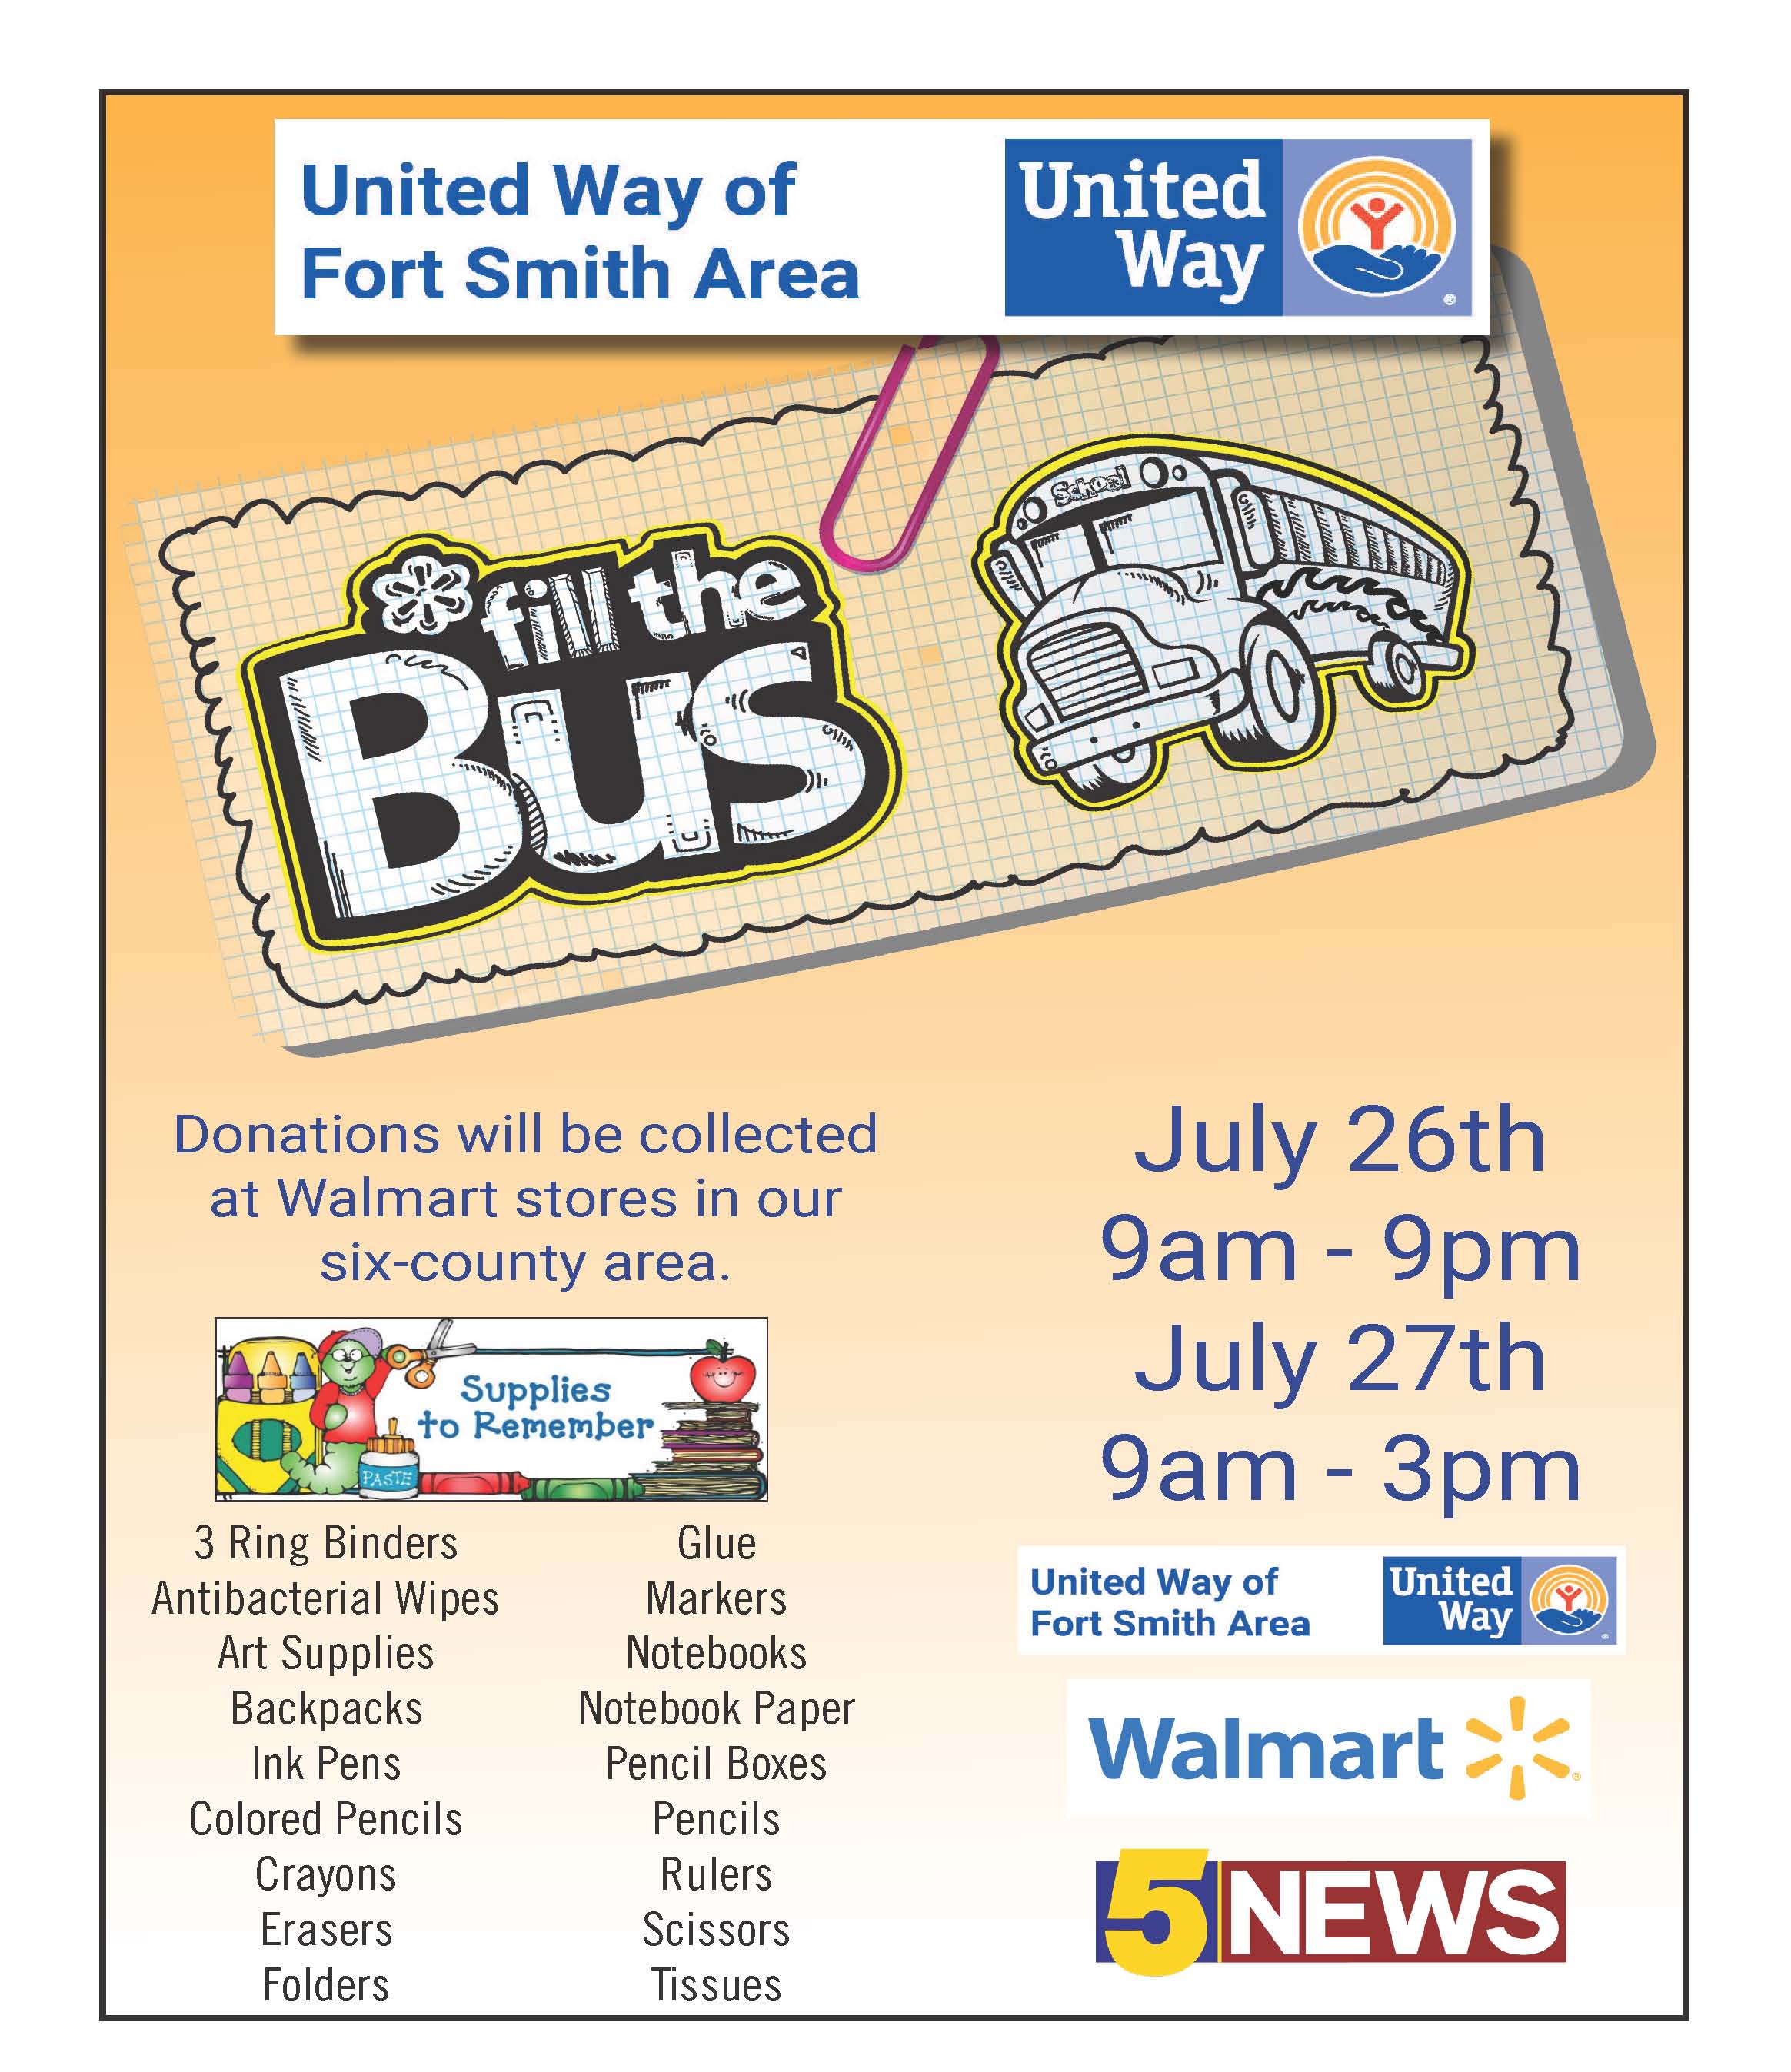 Fill the Bus July 24th and 25th United Way of Fort Smith Area